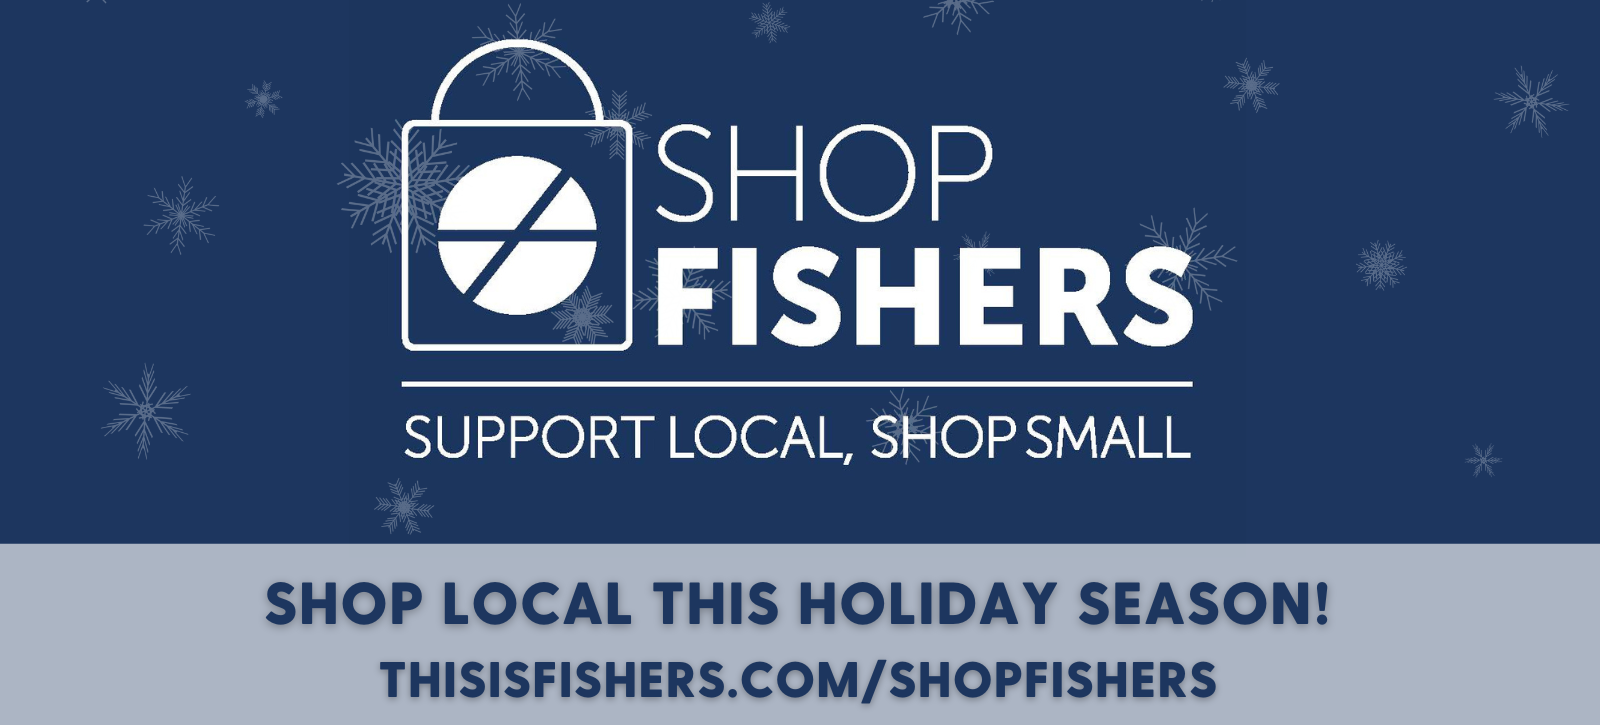 shop fishers. shop local this holiday season!